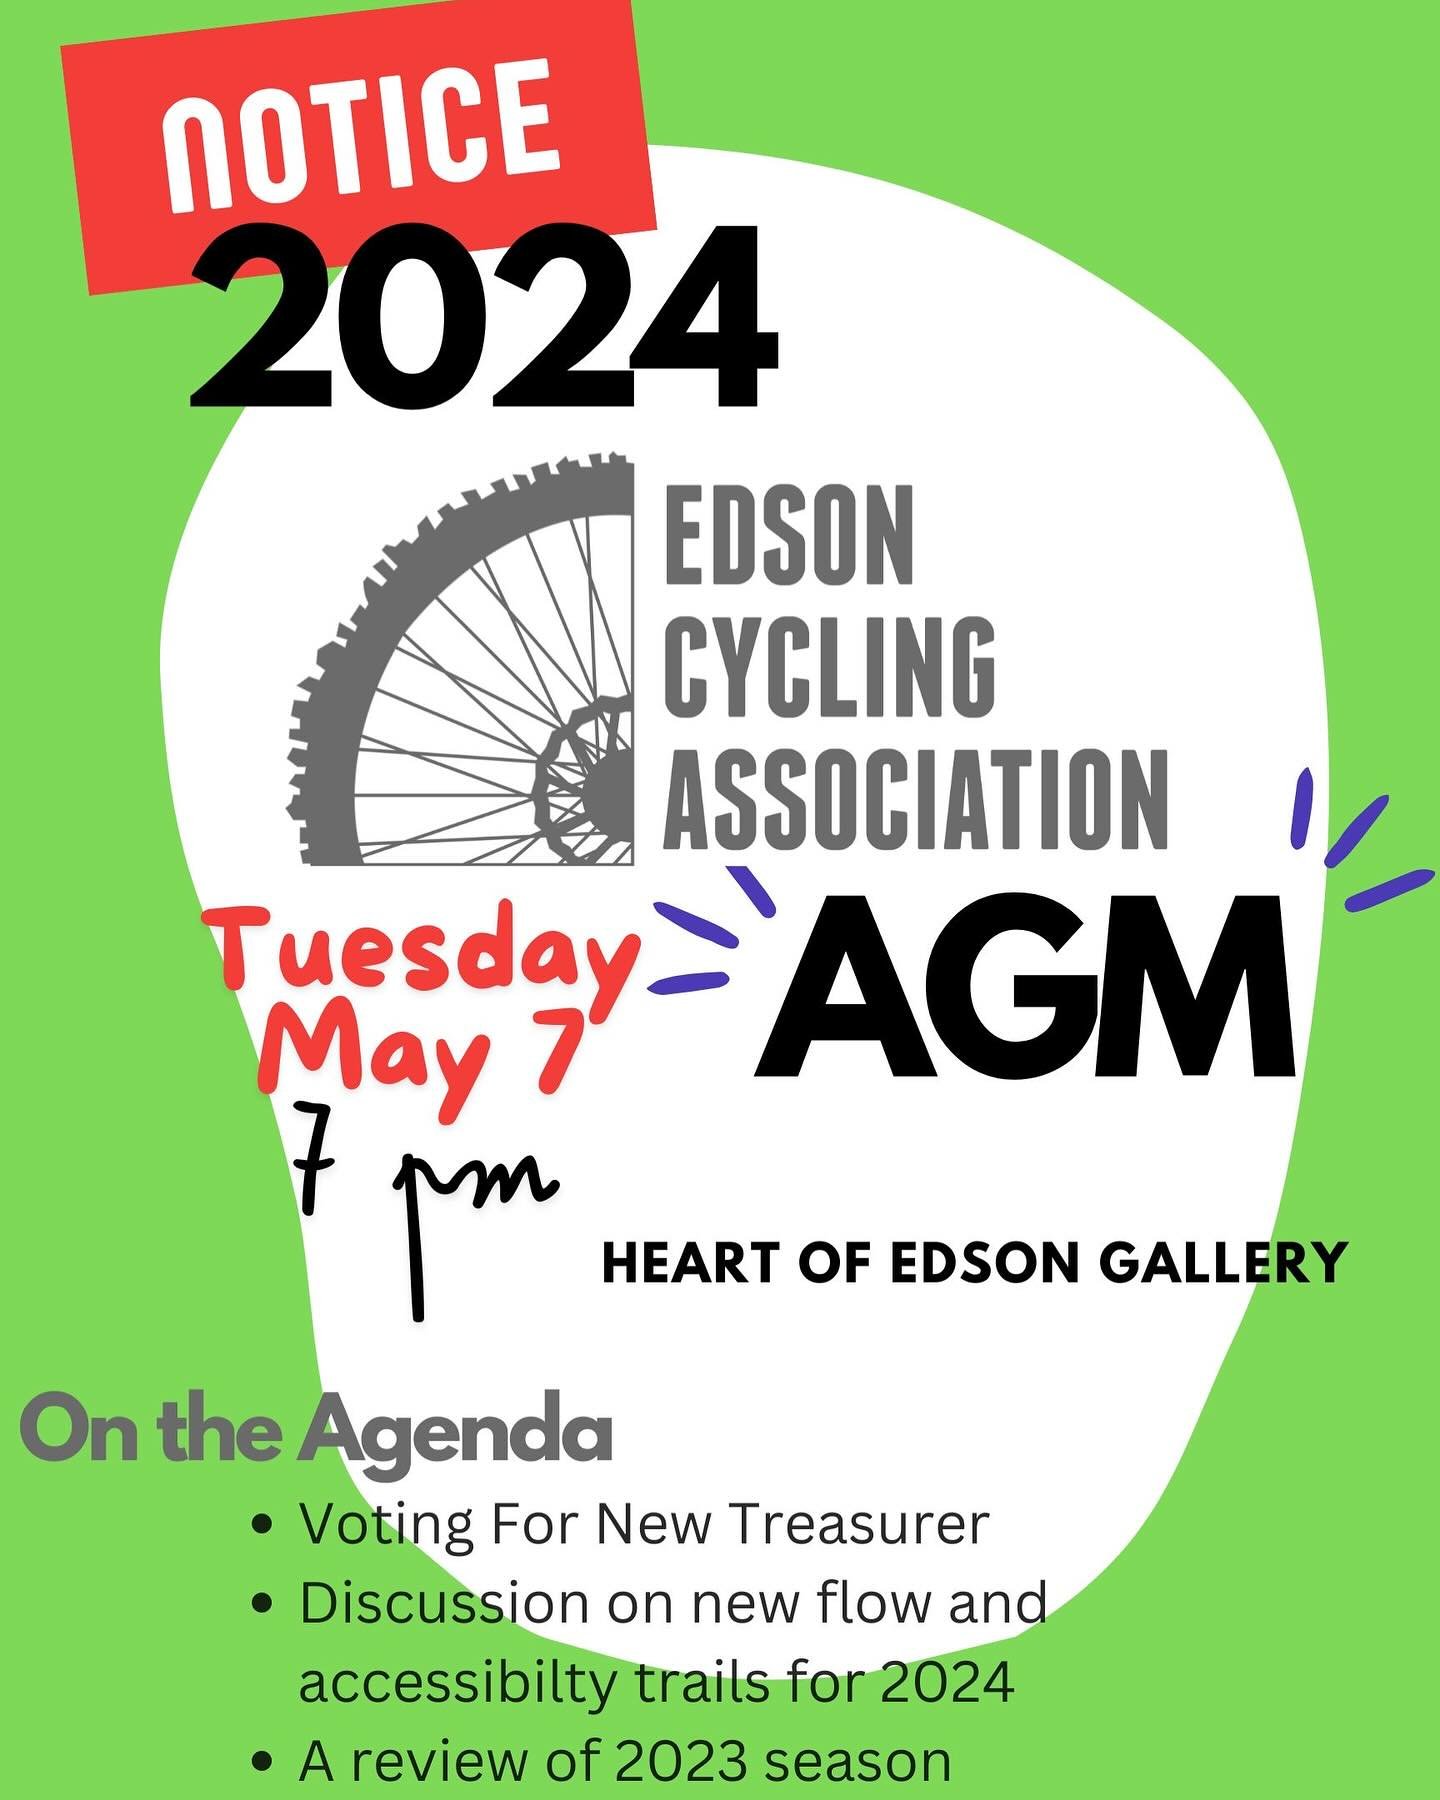 Reminder 📣📣📣
The 2024 AGM is this Tuesday! 
Please have your memberships purchased in advance, link in bio.